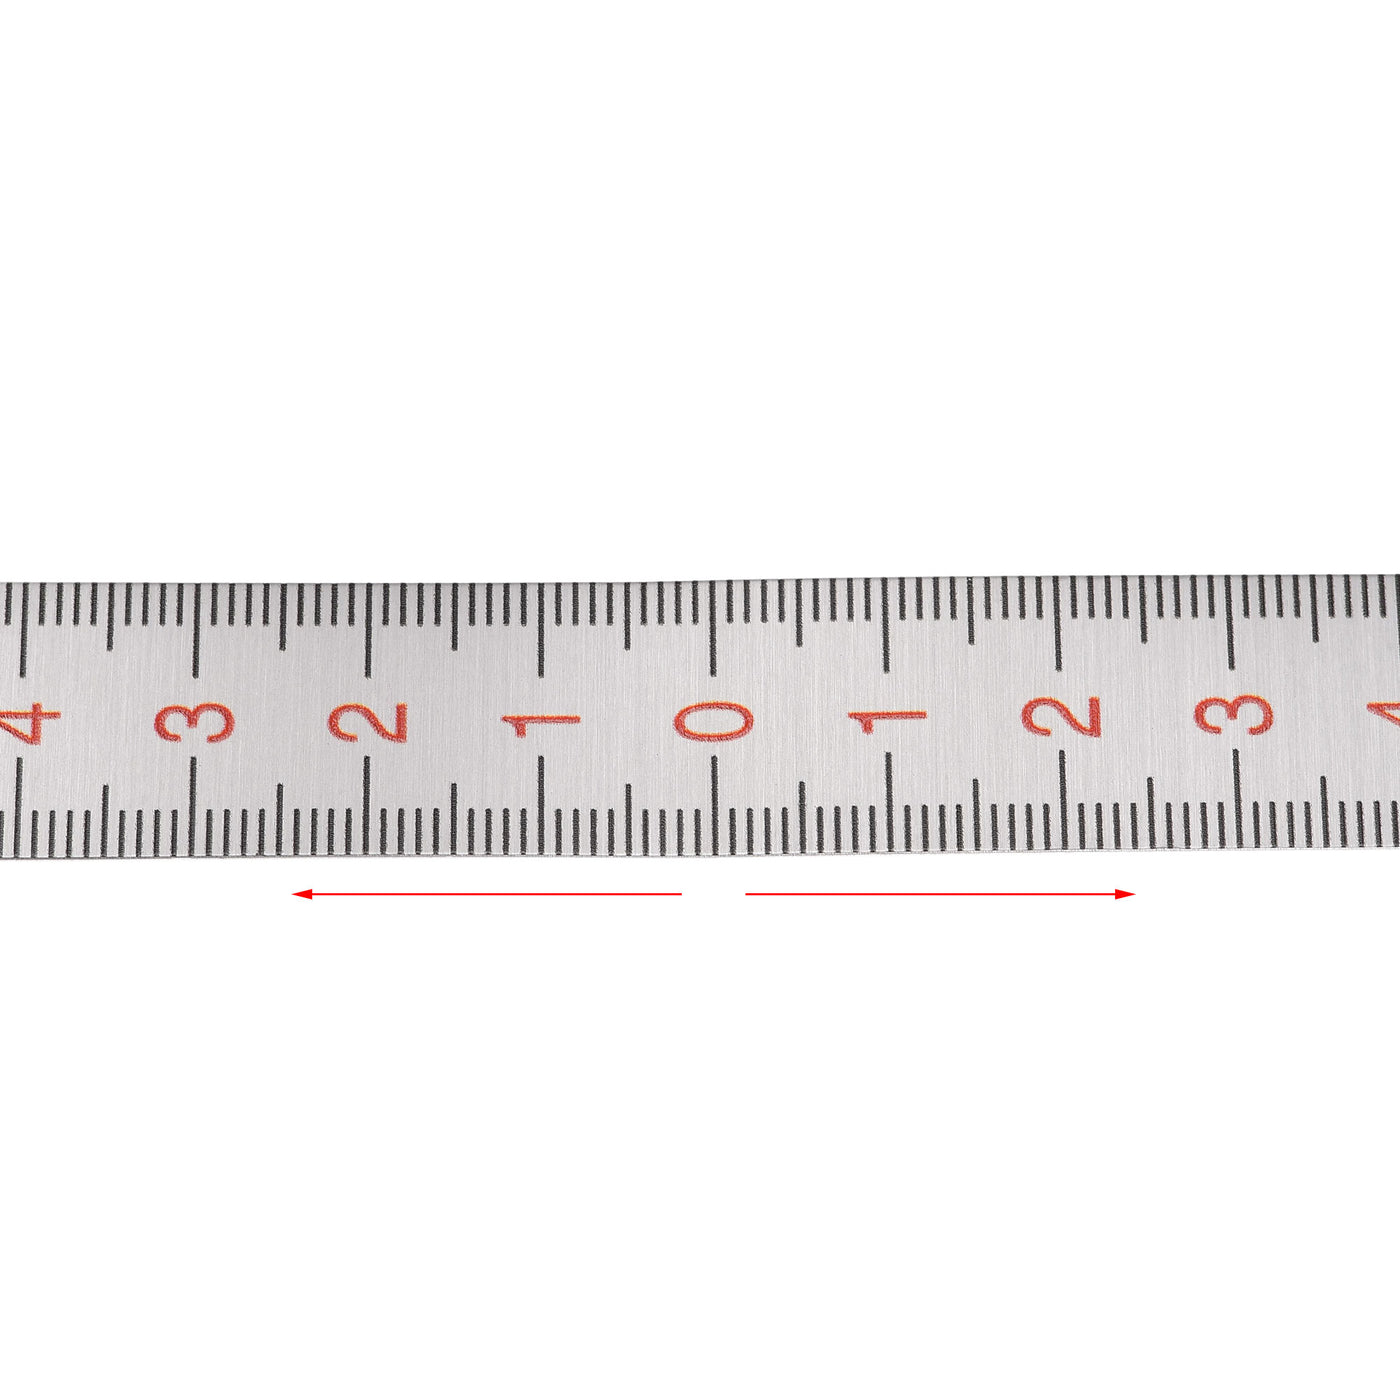 uxcell Uxcell Center Finding Ruler 60mm-0-60mm Table Sticky Adhesive Tape Measure, Aluminum Track Ruler with Holes, (from the middle).